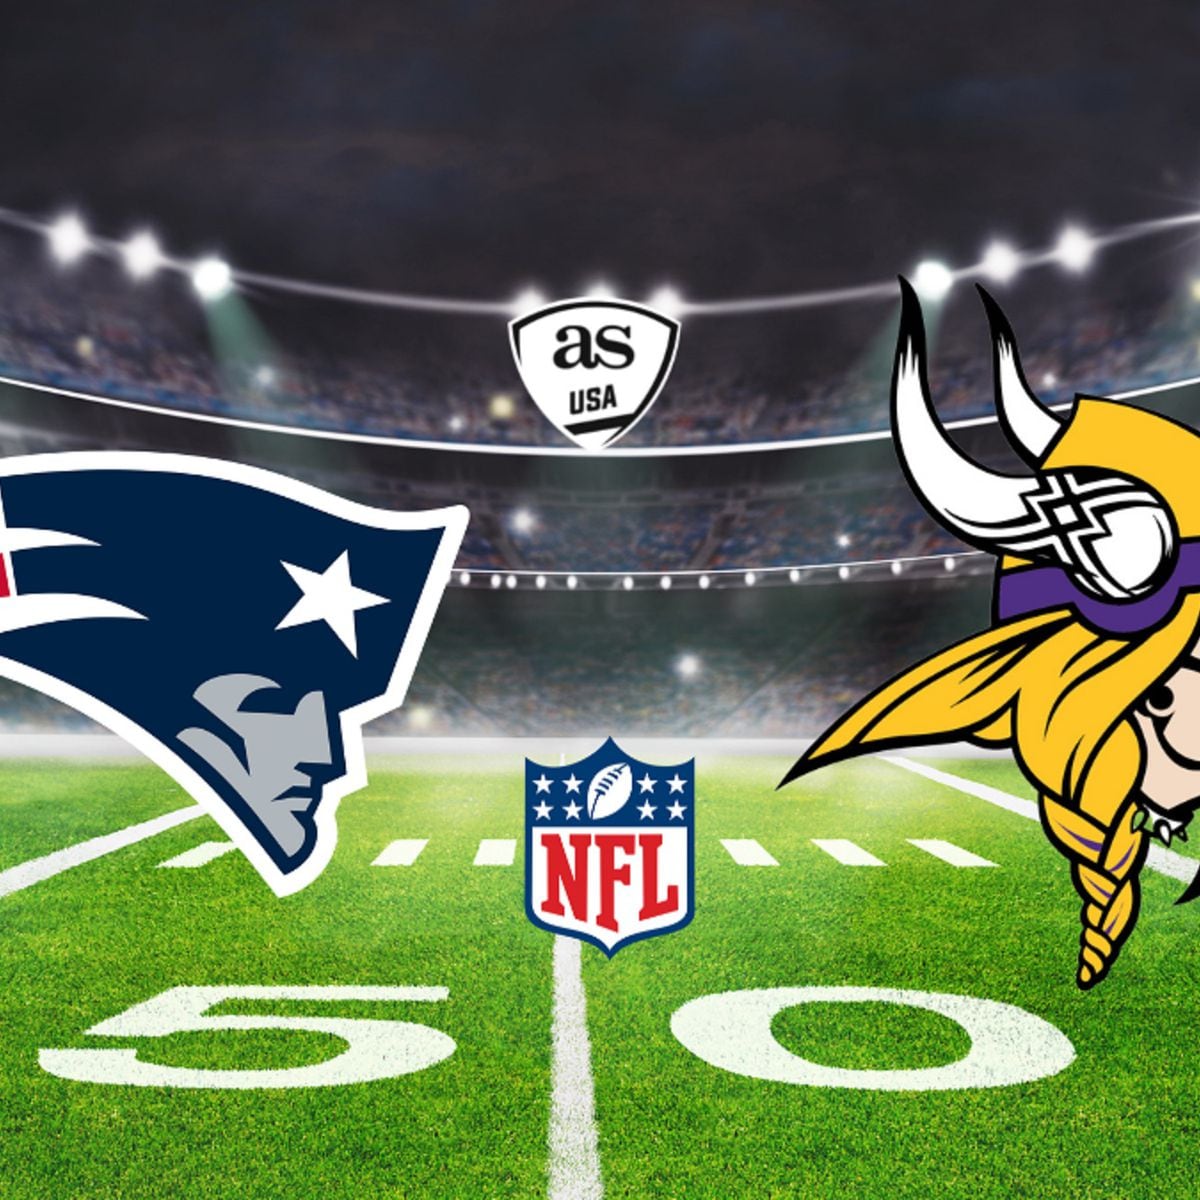 Patriots vs Vikings on NFL Thanksgiving Day 2022: times, how to